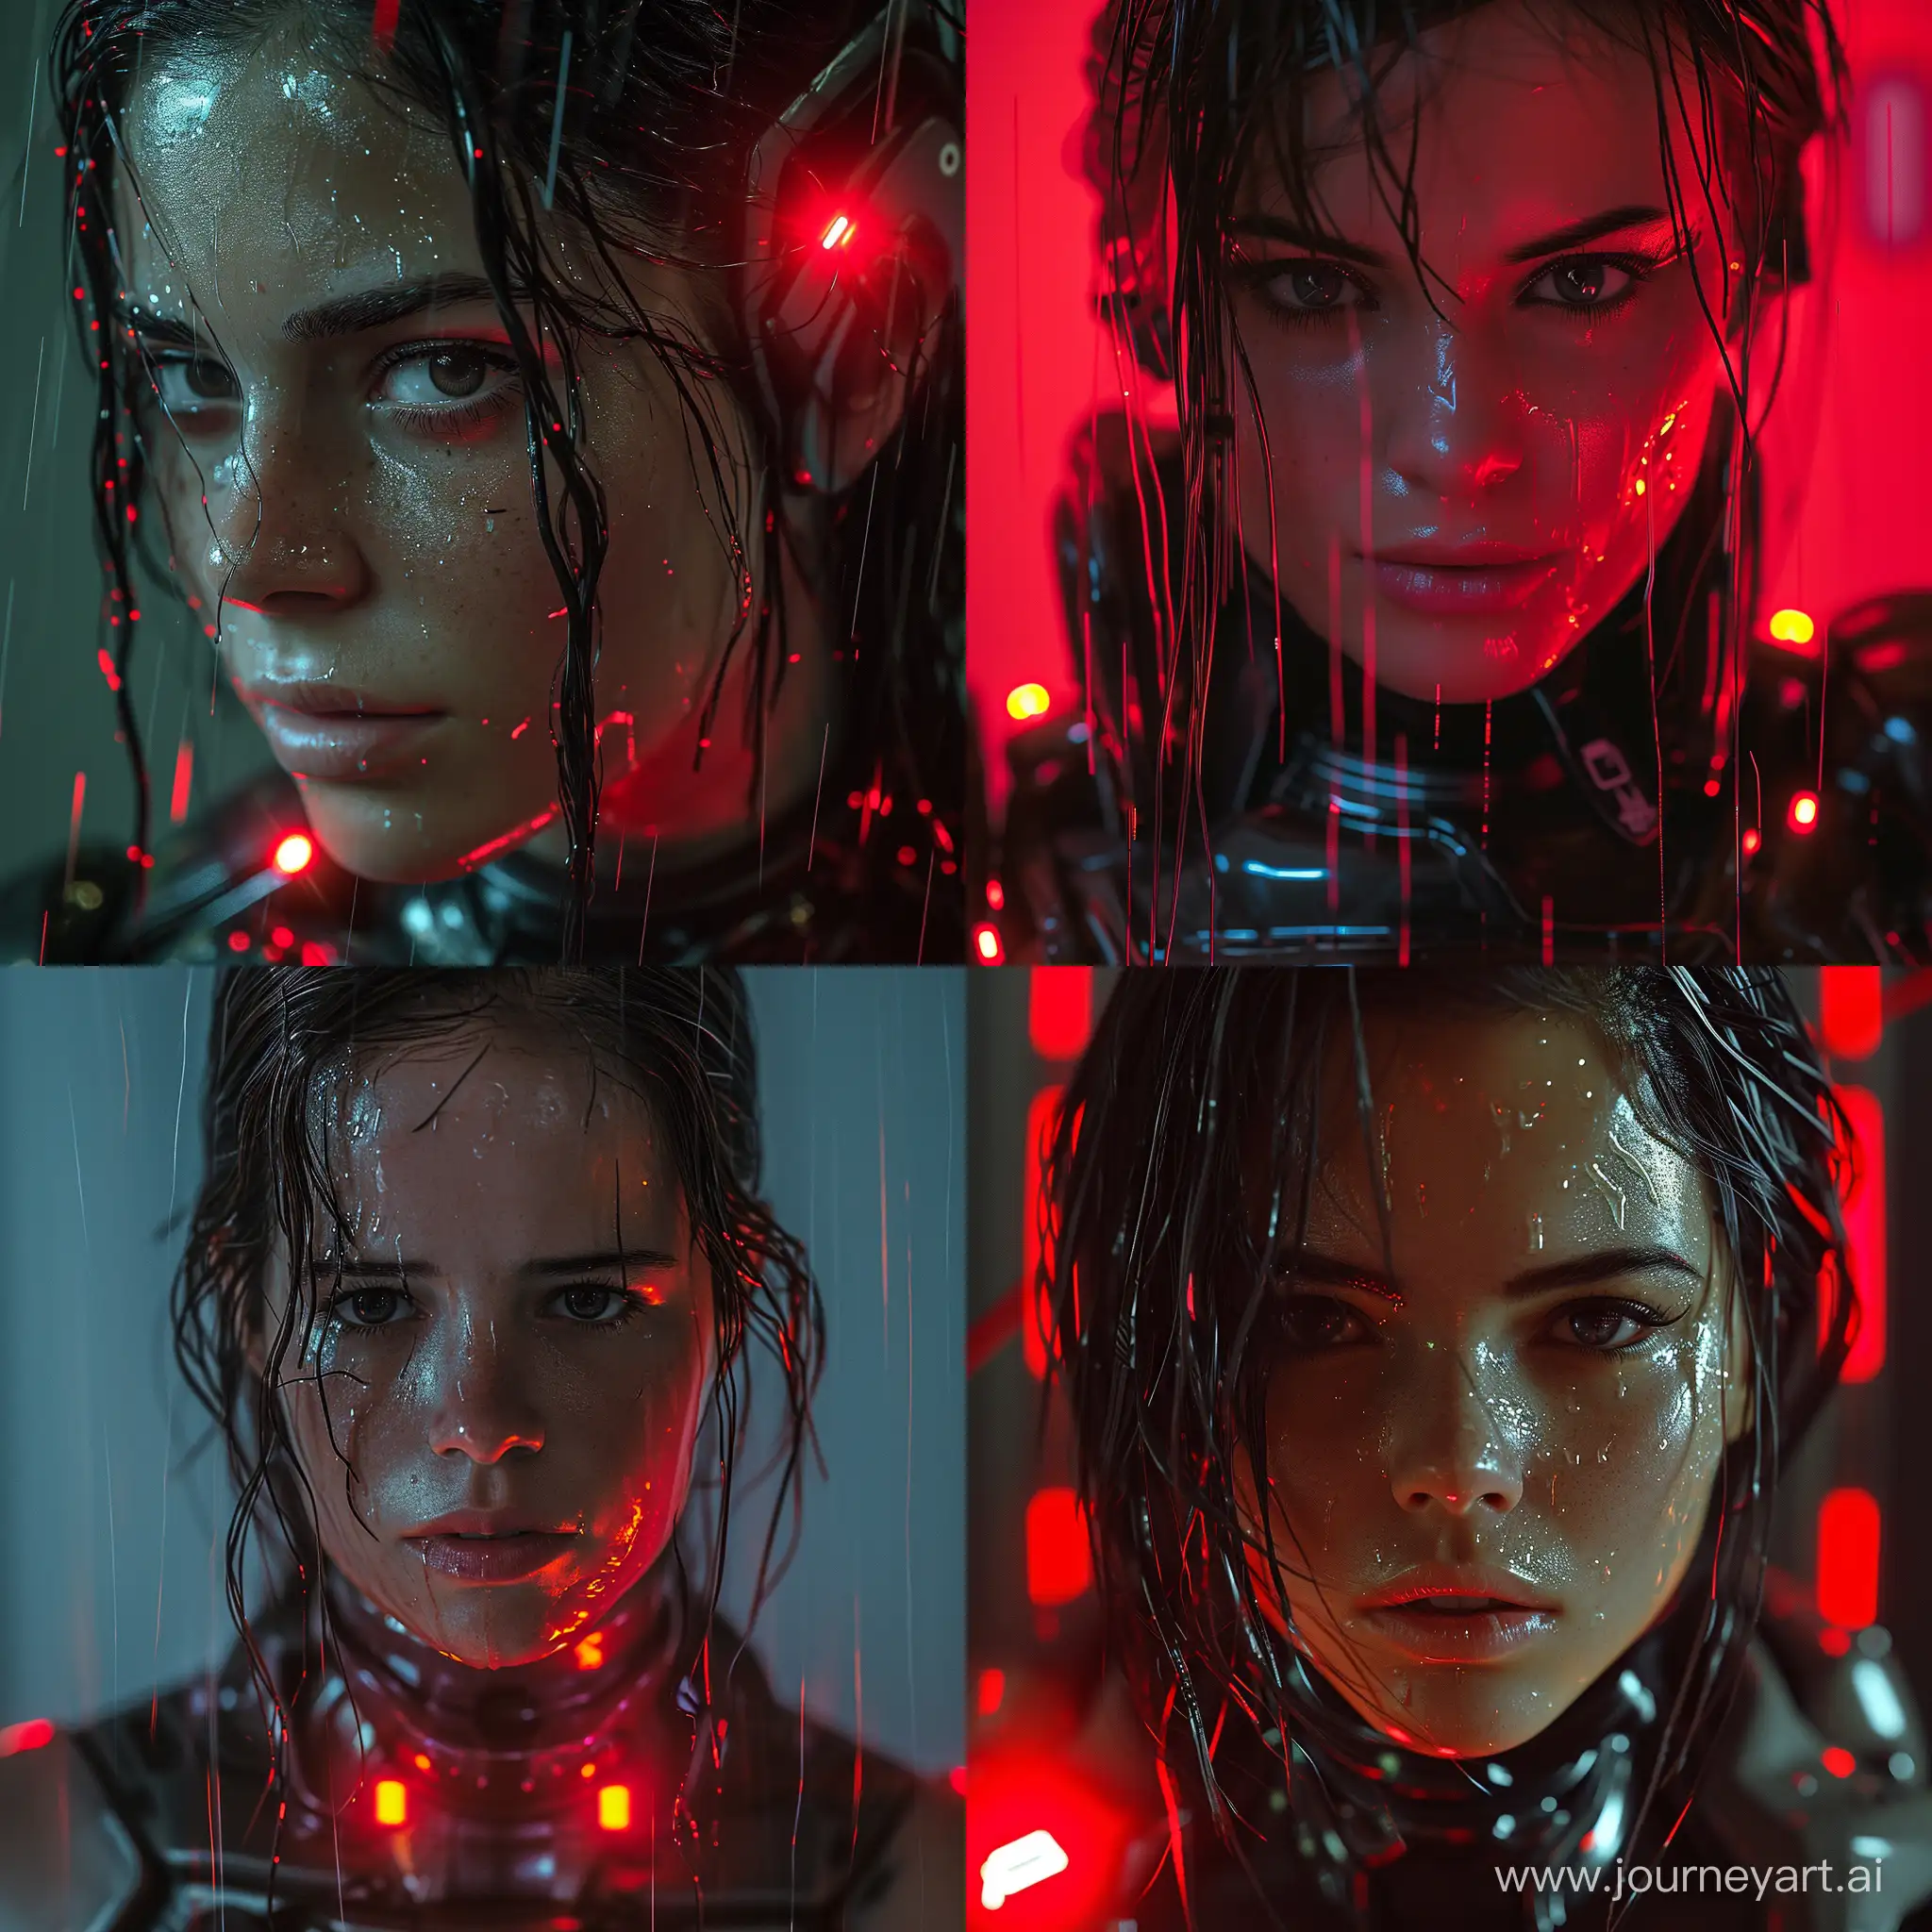 Hyper realistic face of a woman, adult, serious expression, dark wet hair, sci fi biomechanical suit, beautiful, alien, red lights